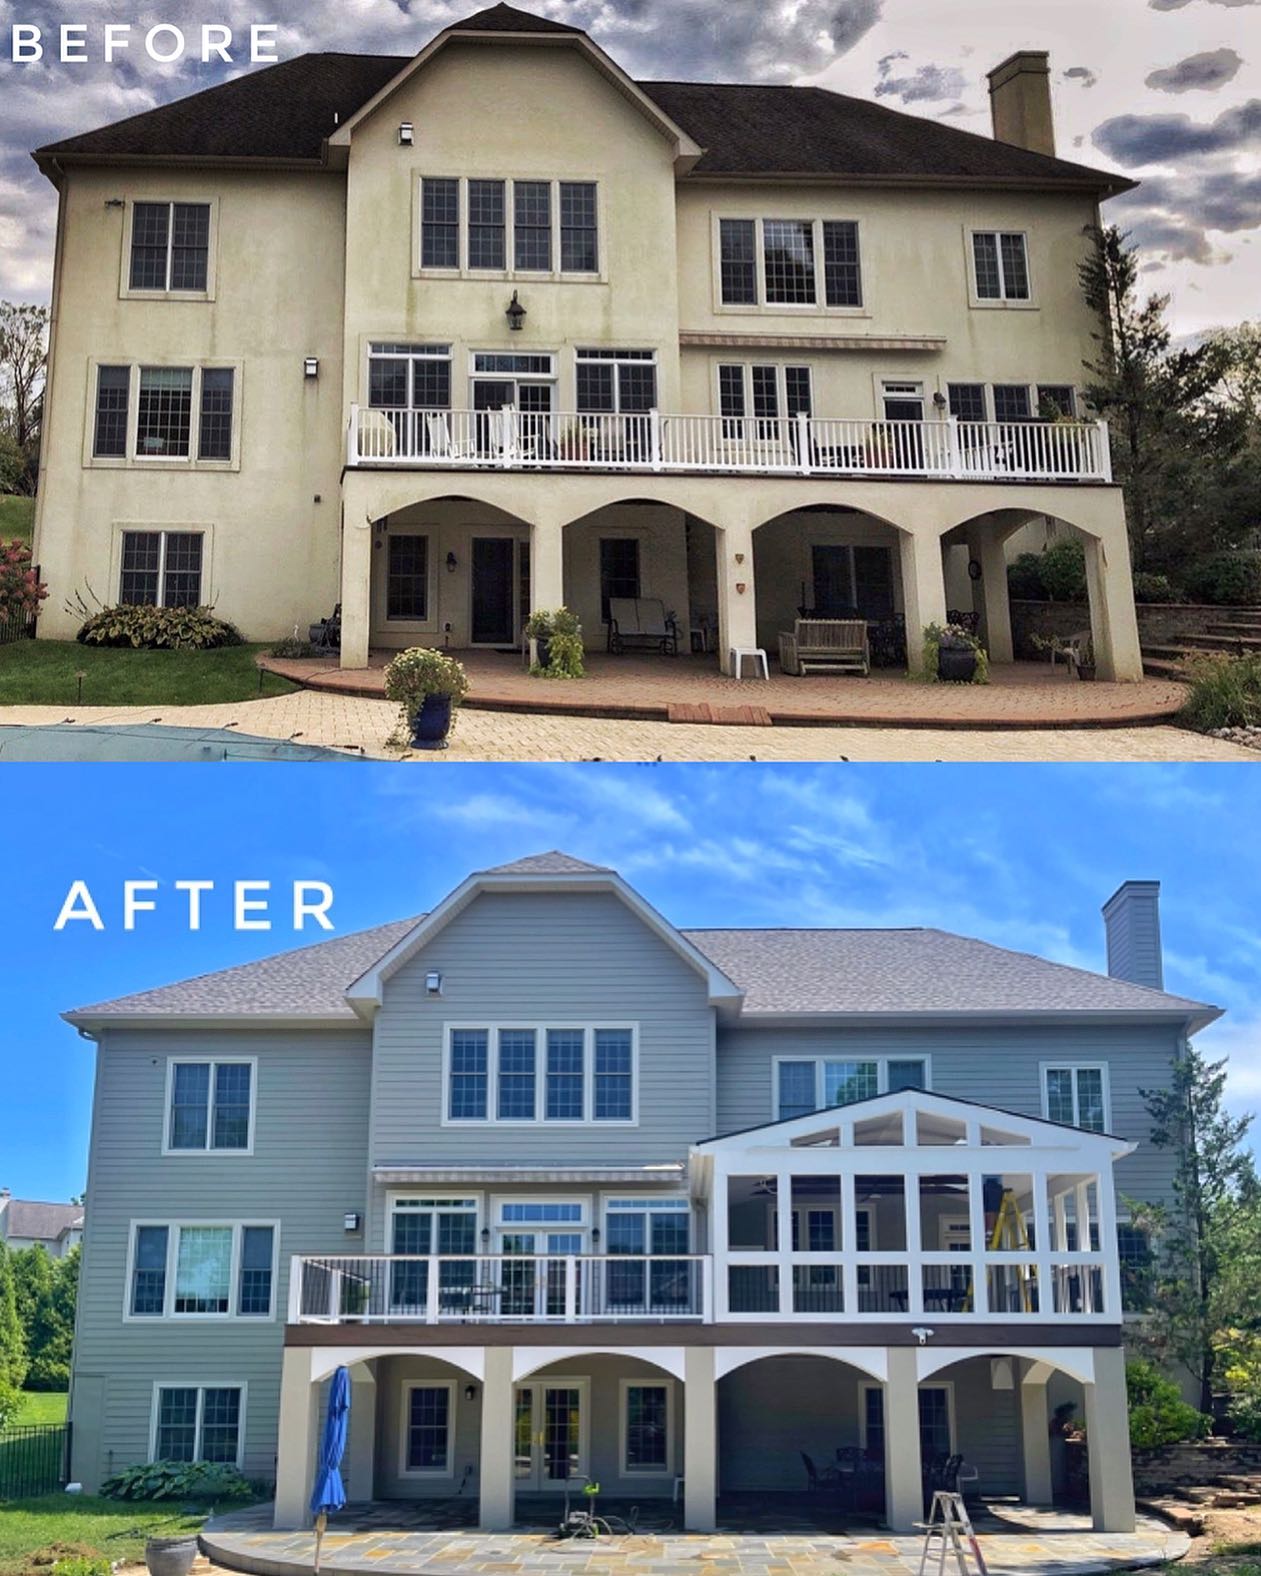 Stucco Remediation / Exterior Remodel with added Sunroom